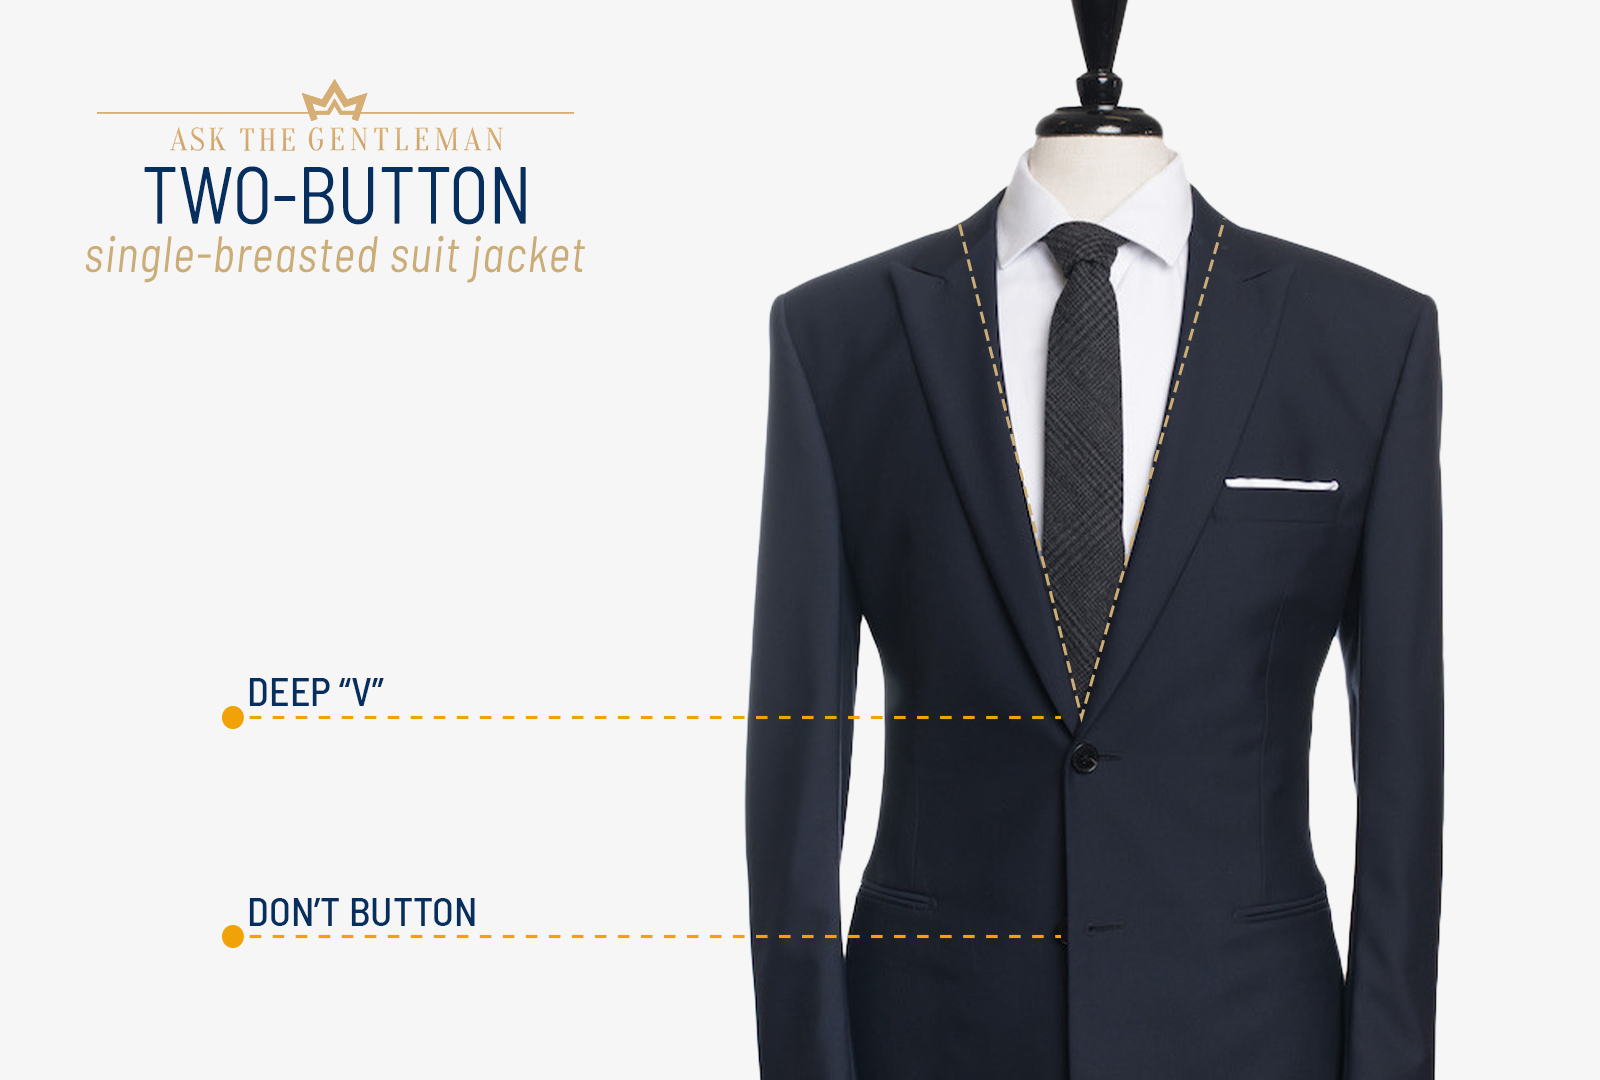 Single-breasted two-button suit jacket style rules